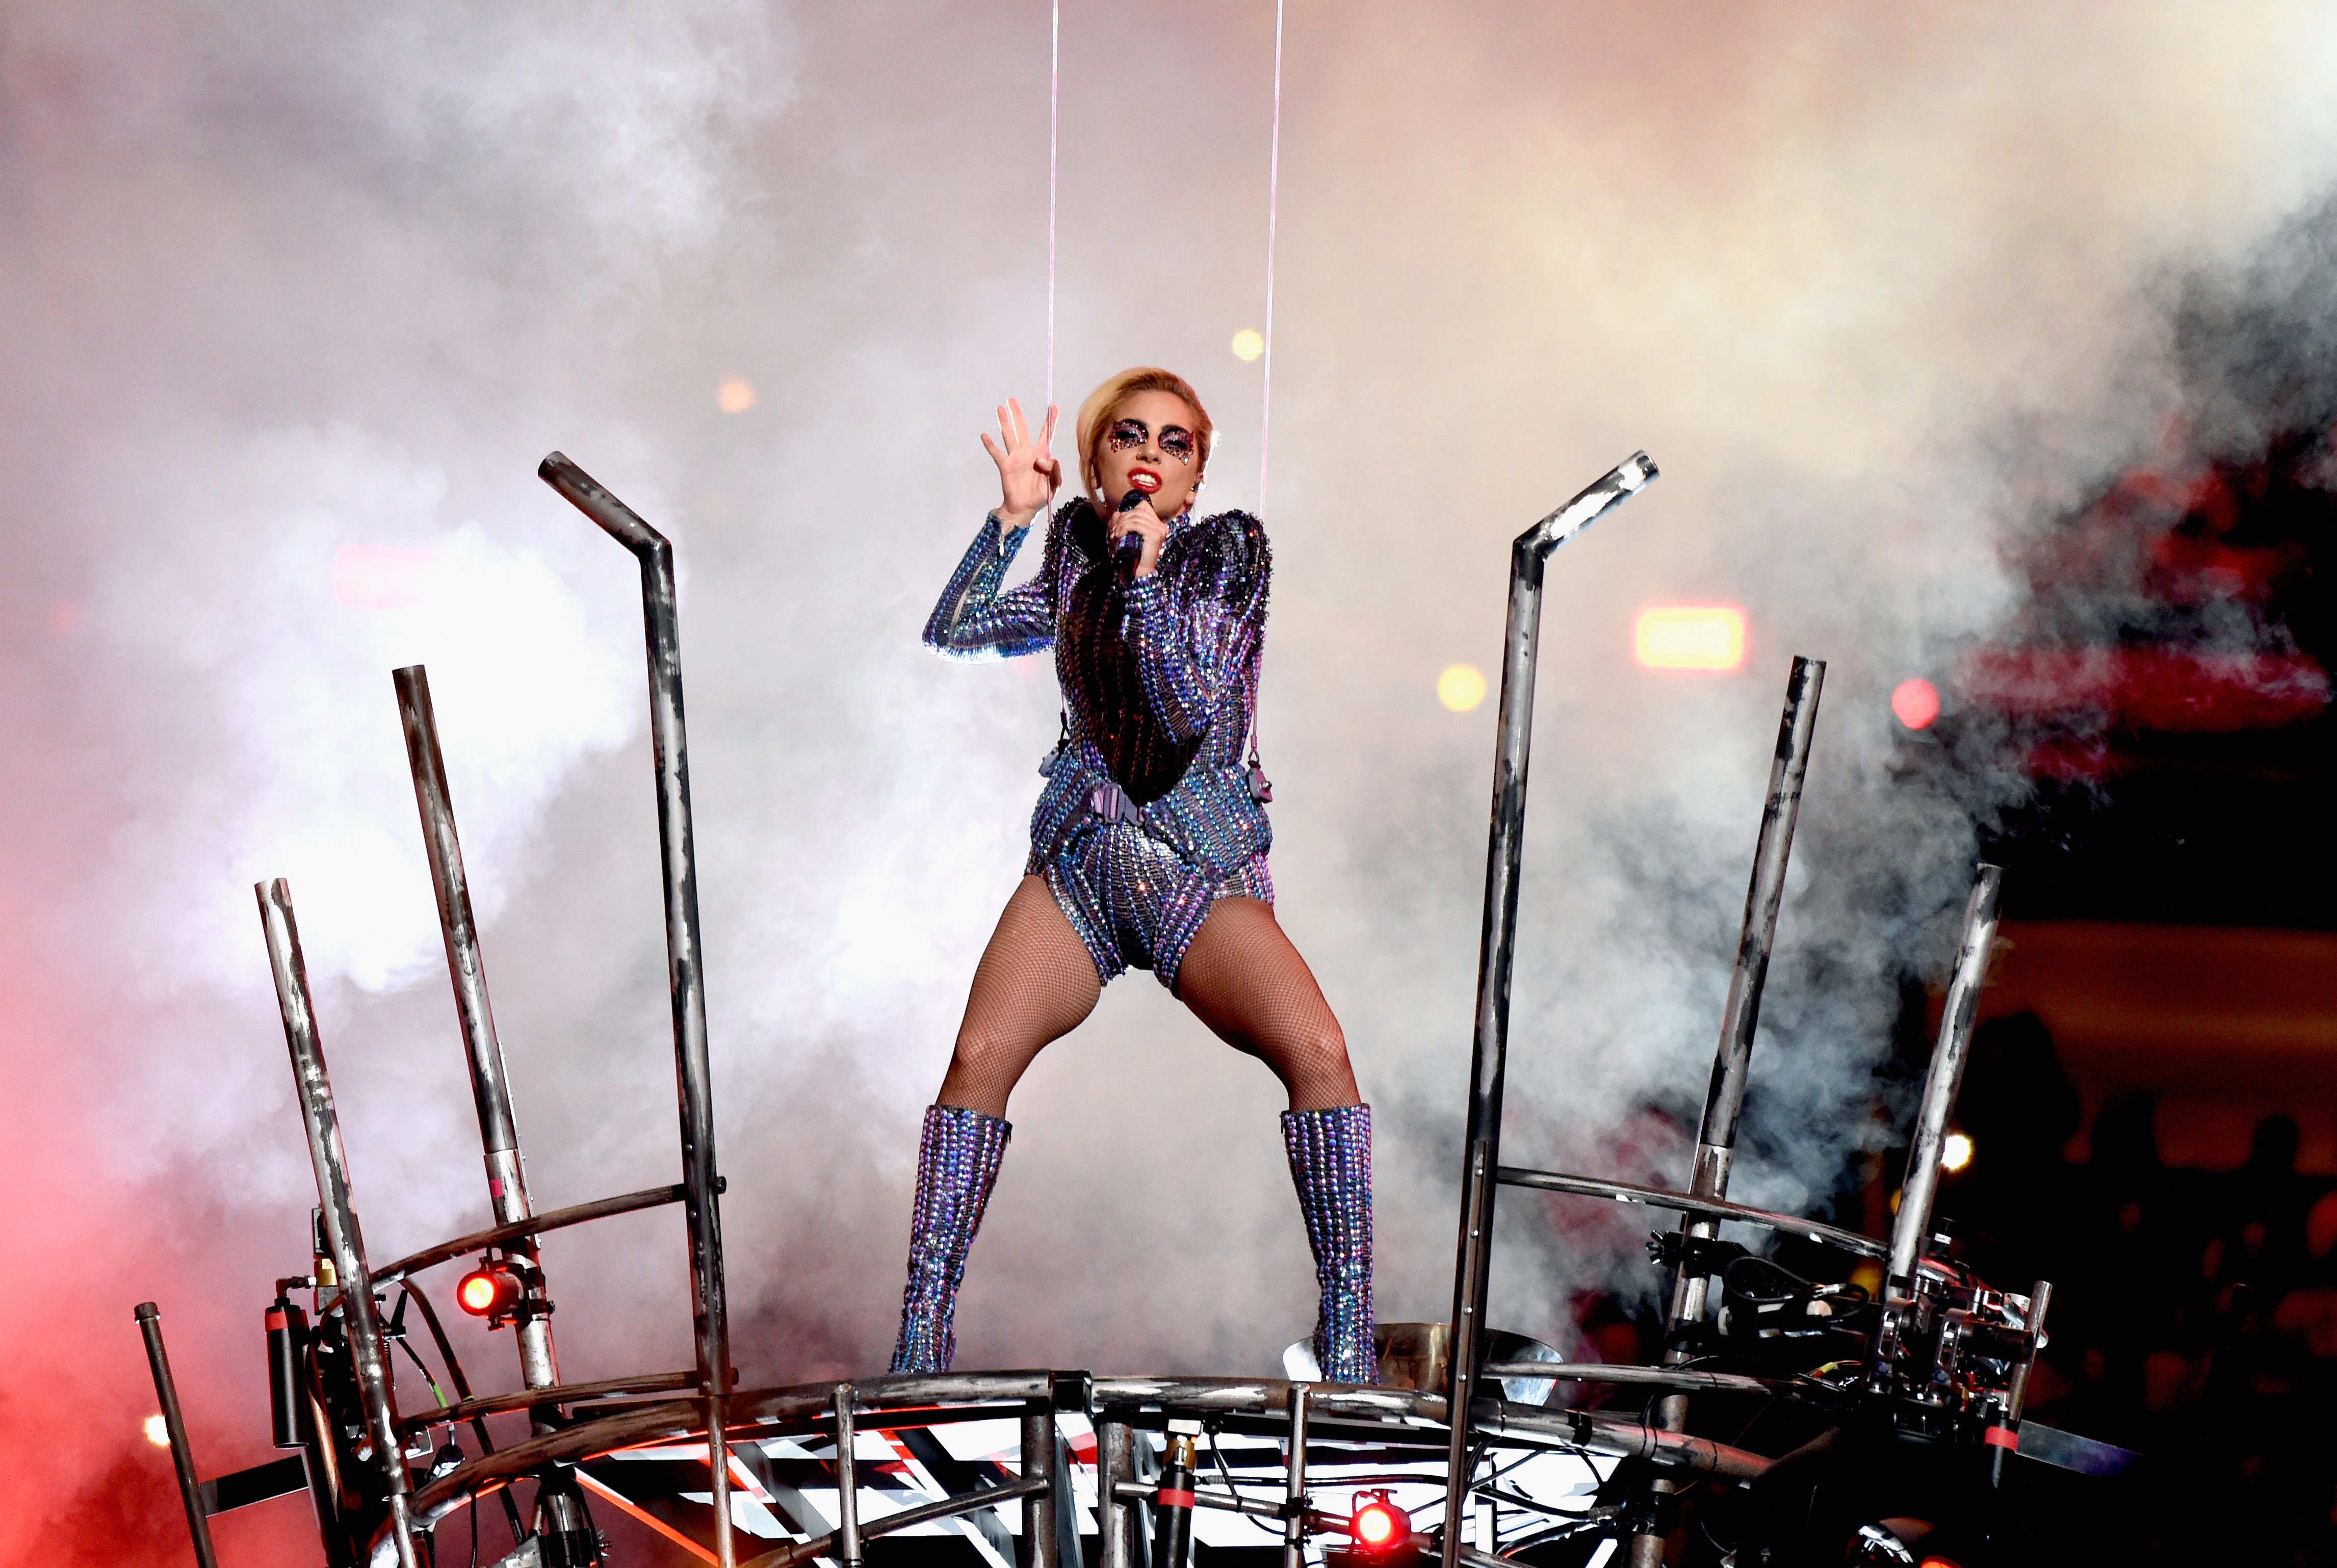 HOUSTON, TX - FEBRUARY 05:  Musician Lady Gaga performs onstage during the Pepsi Zero Sugar Super Bowl LI Halftime Show at NRG Stadium on February 5, 2017 in Houston, Texas.  (Photo by Kevin Mazur/WireImage) (Kevin Mazur—WireImage)